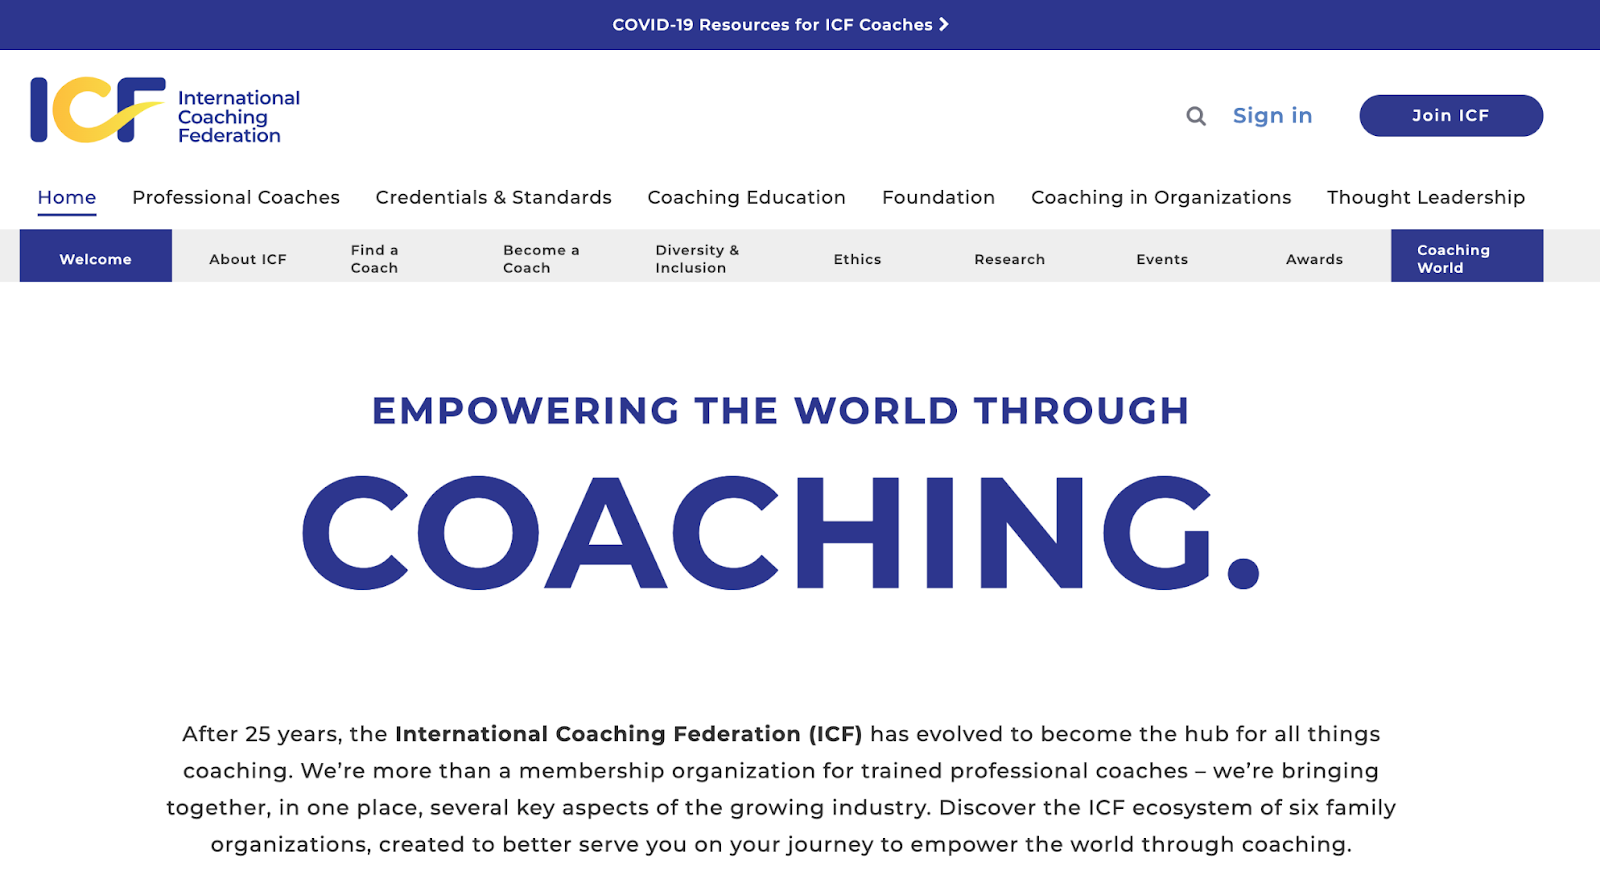 6 Life Coaching Organizations to Empower Your Business